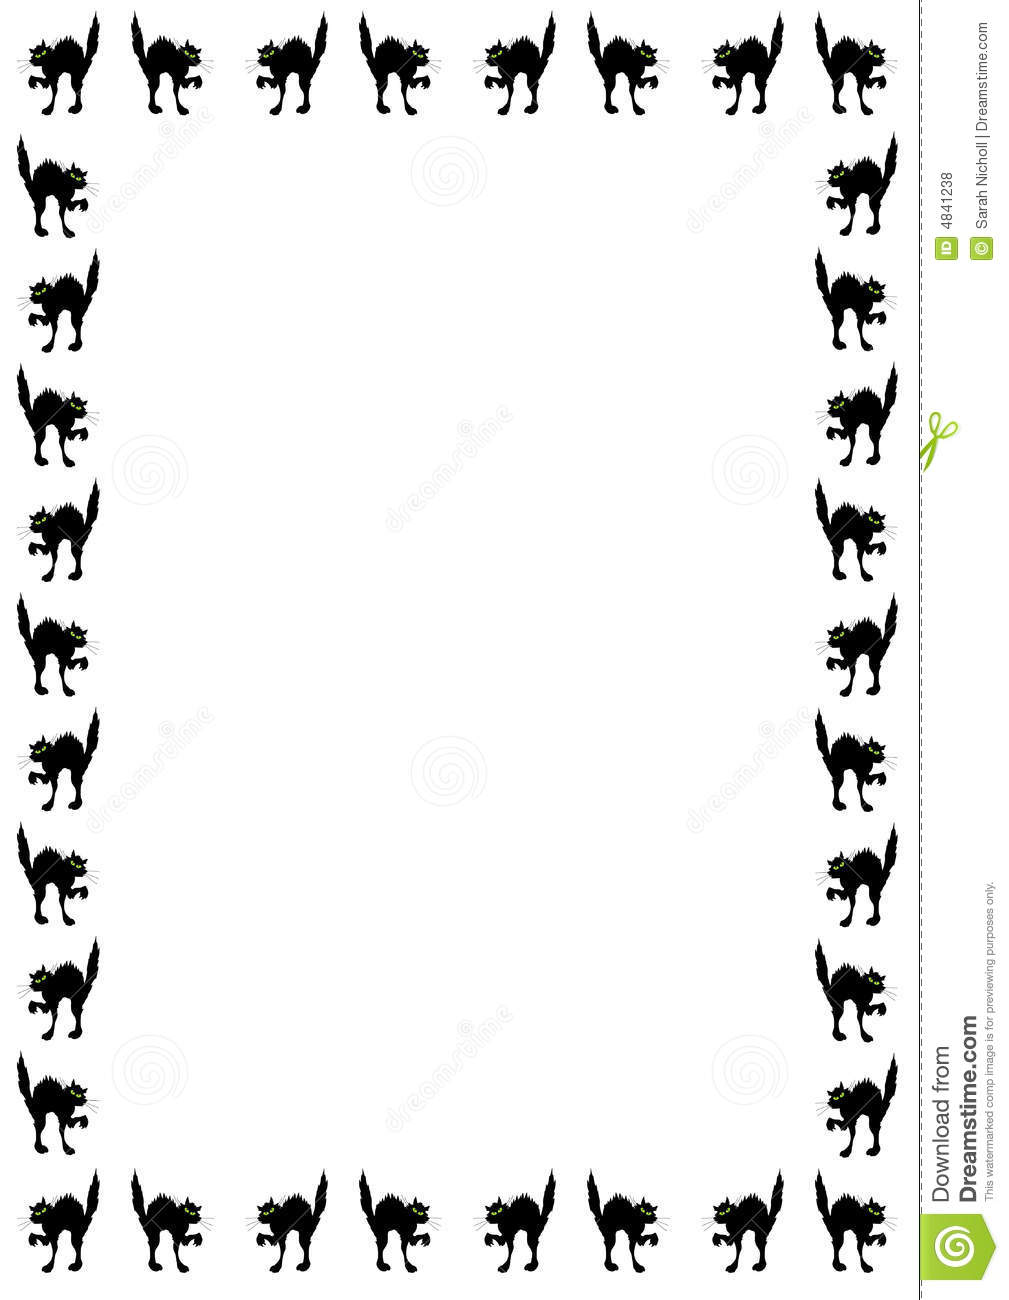 Halloween Border Black And White   Clipart Panda   Free Clipart Images